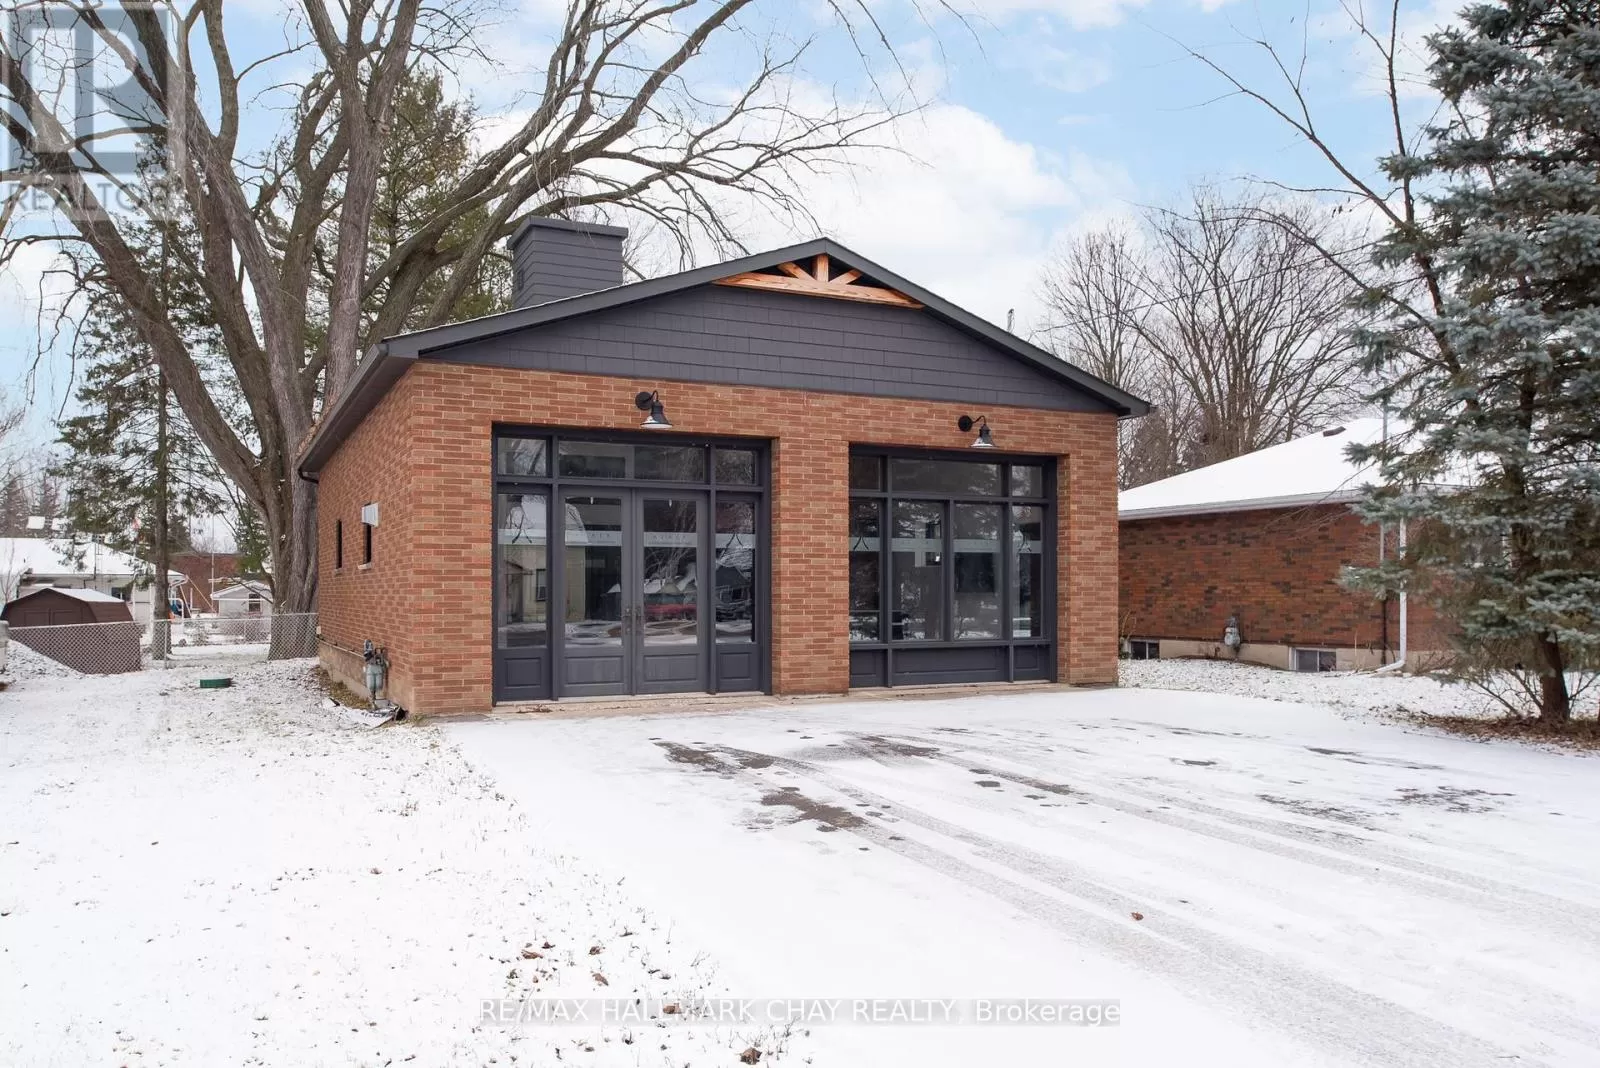 Offices for rent: 1663 George Johnston Rd, Springwater, Ontario L0L 1Y0